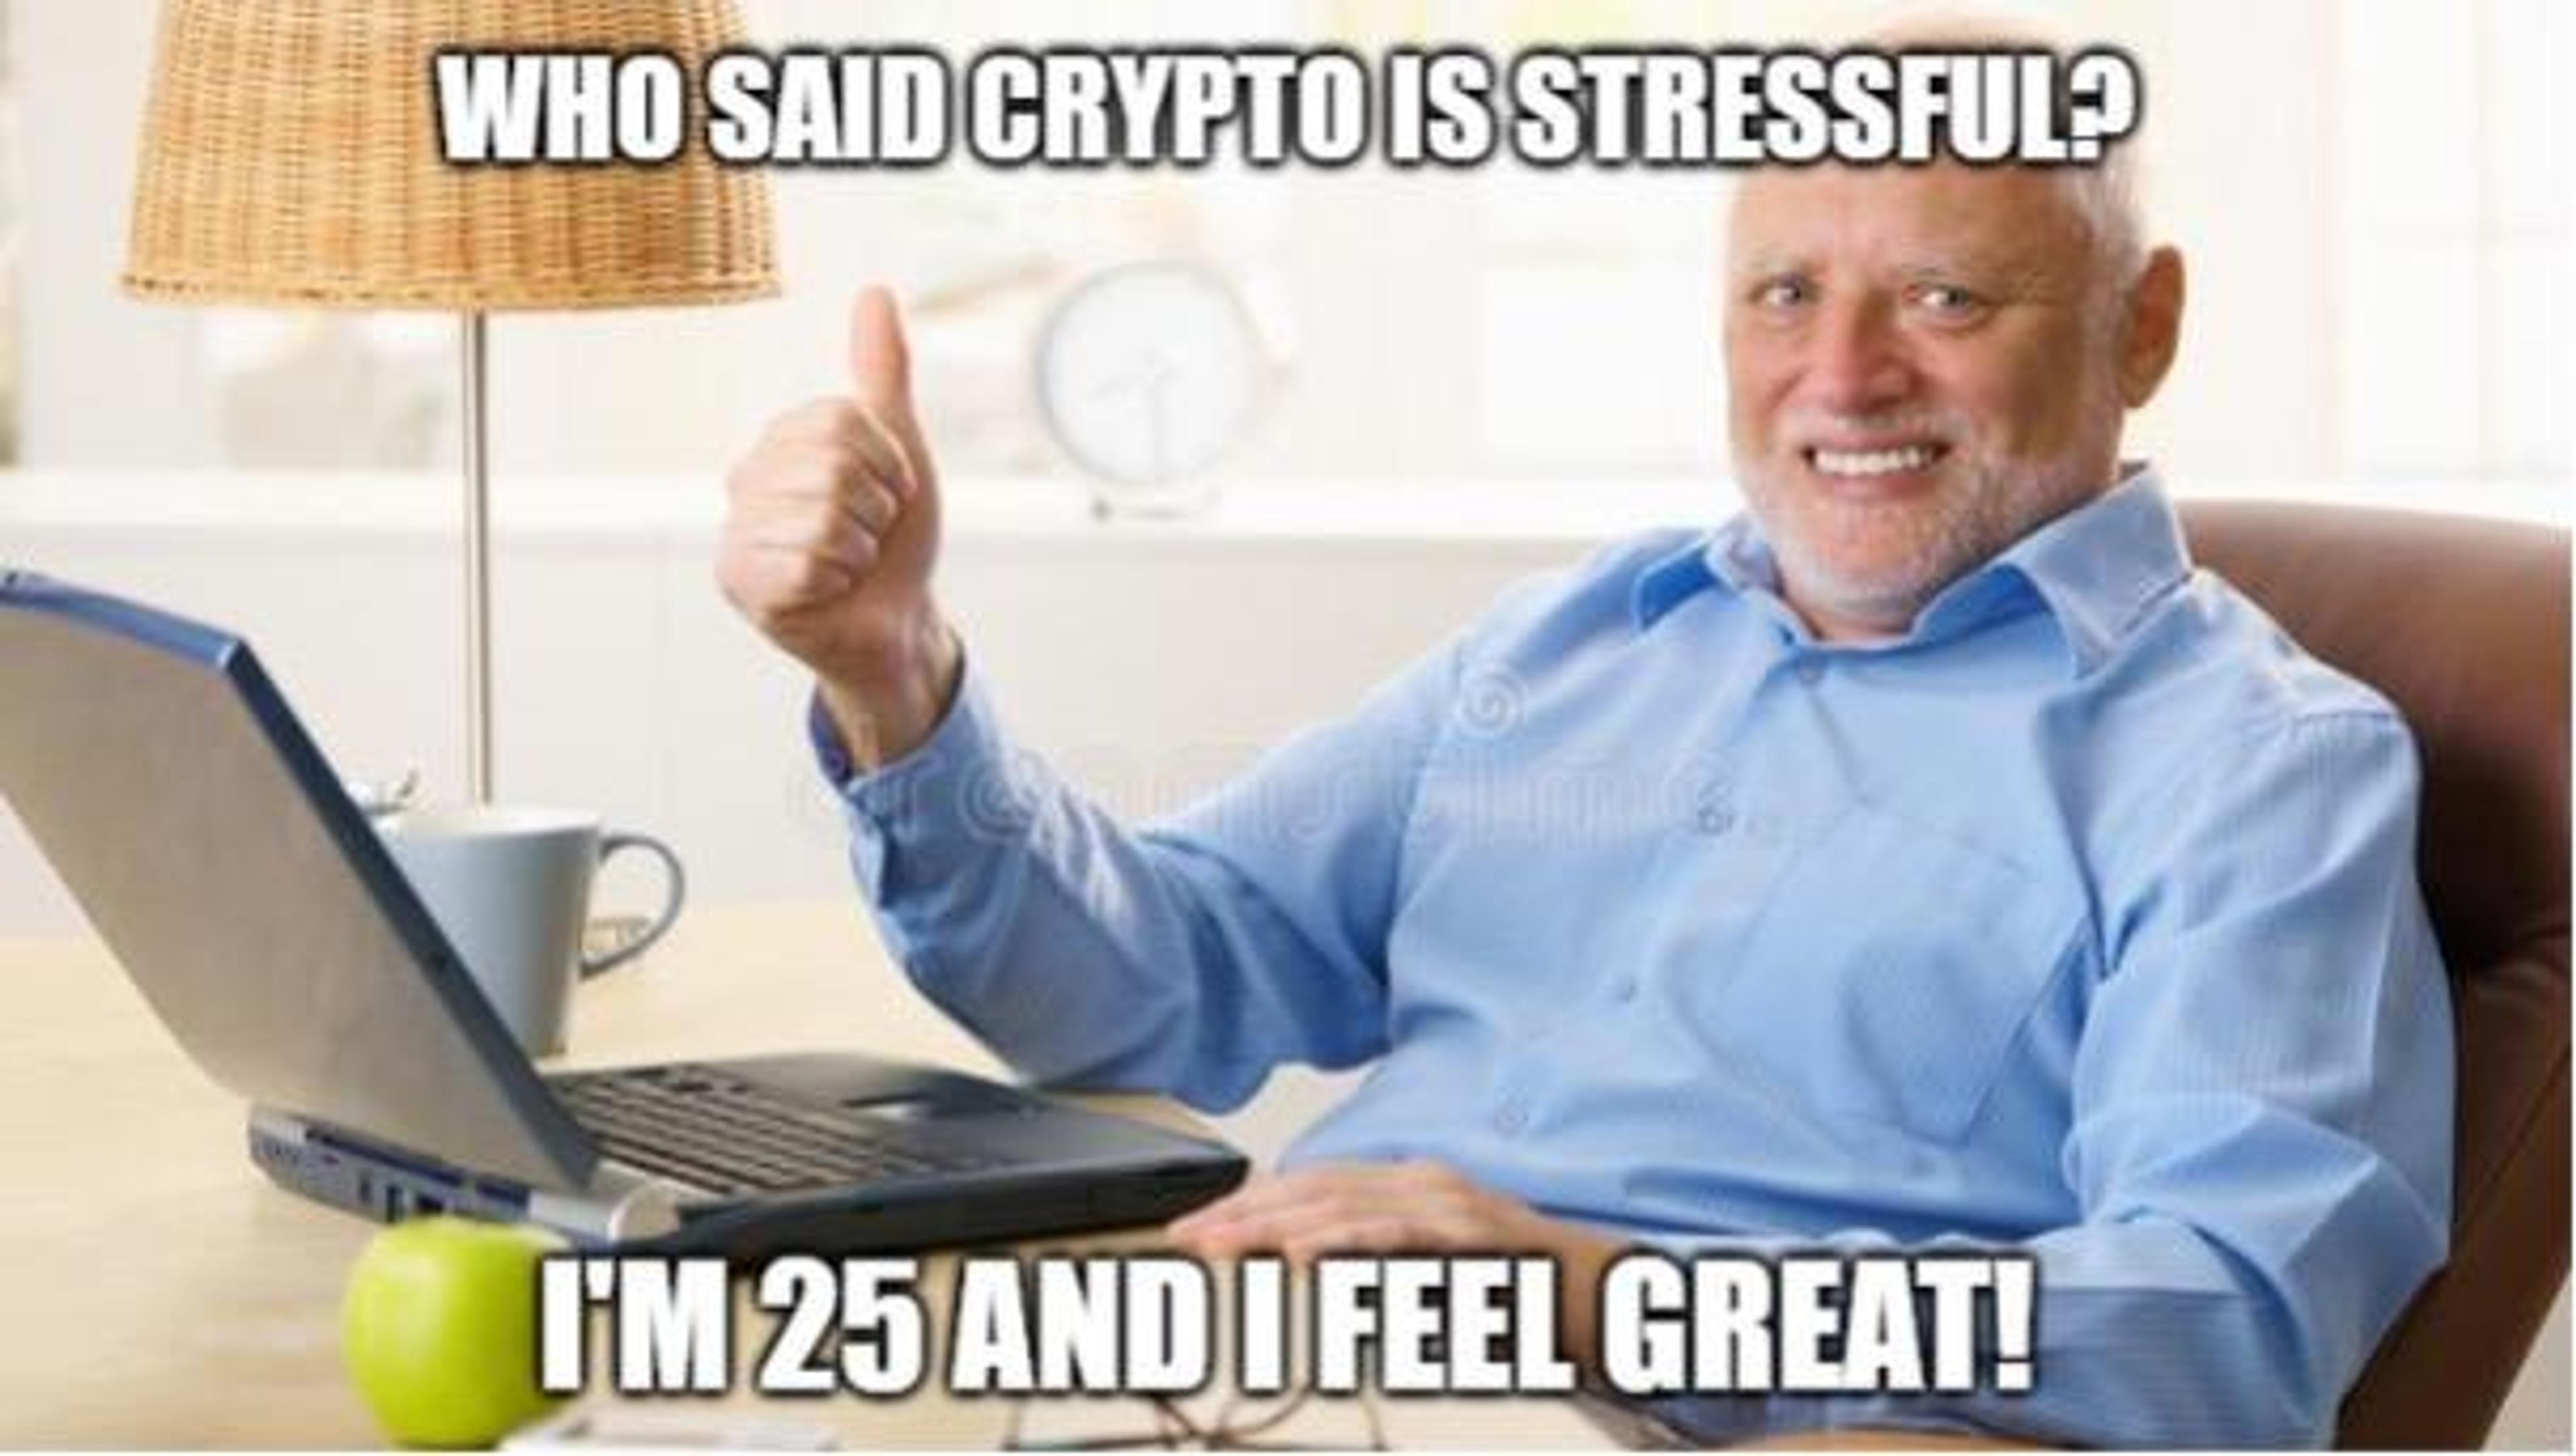 Cryptocurrency investment meme, source unknown